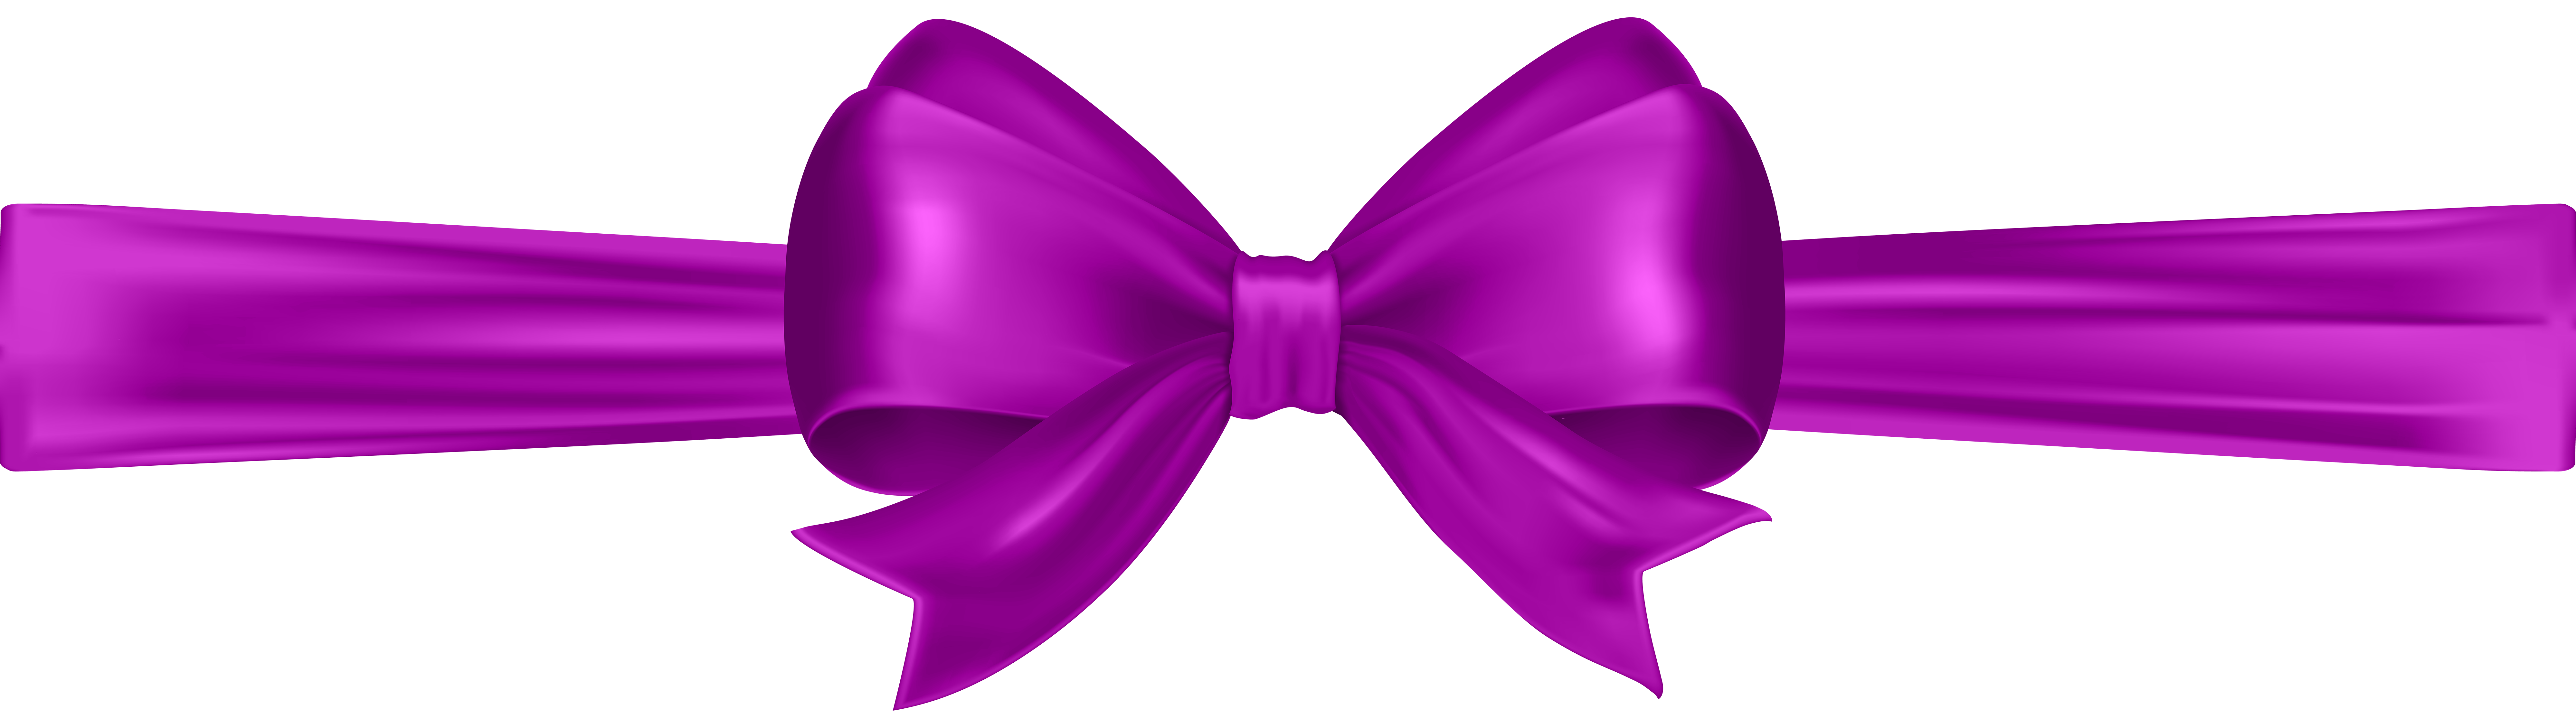 Purple Bow Deco PNG Clip Art Image | Gallery Yopriceville - High ...